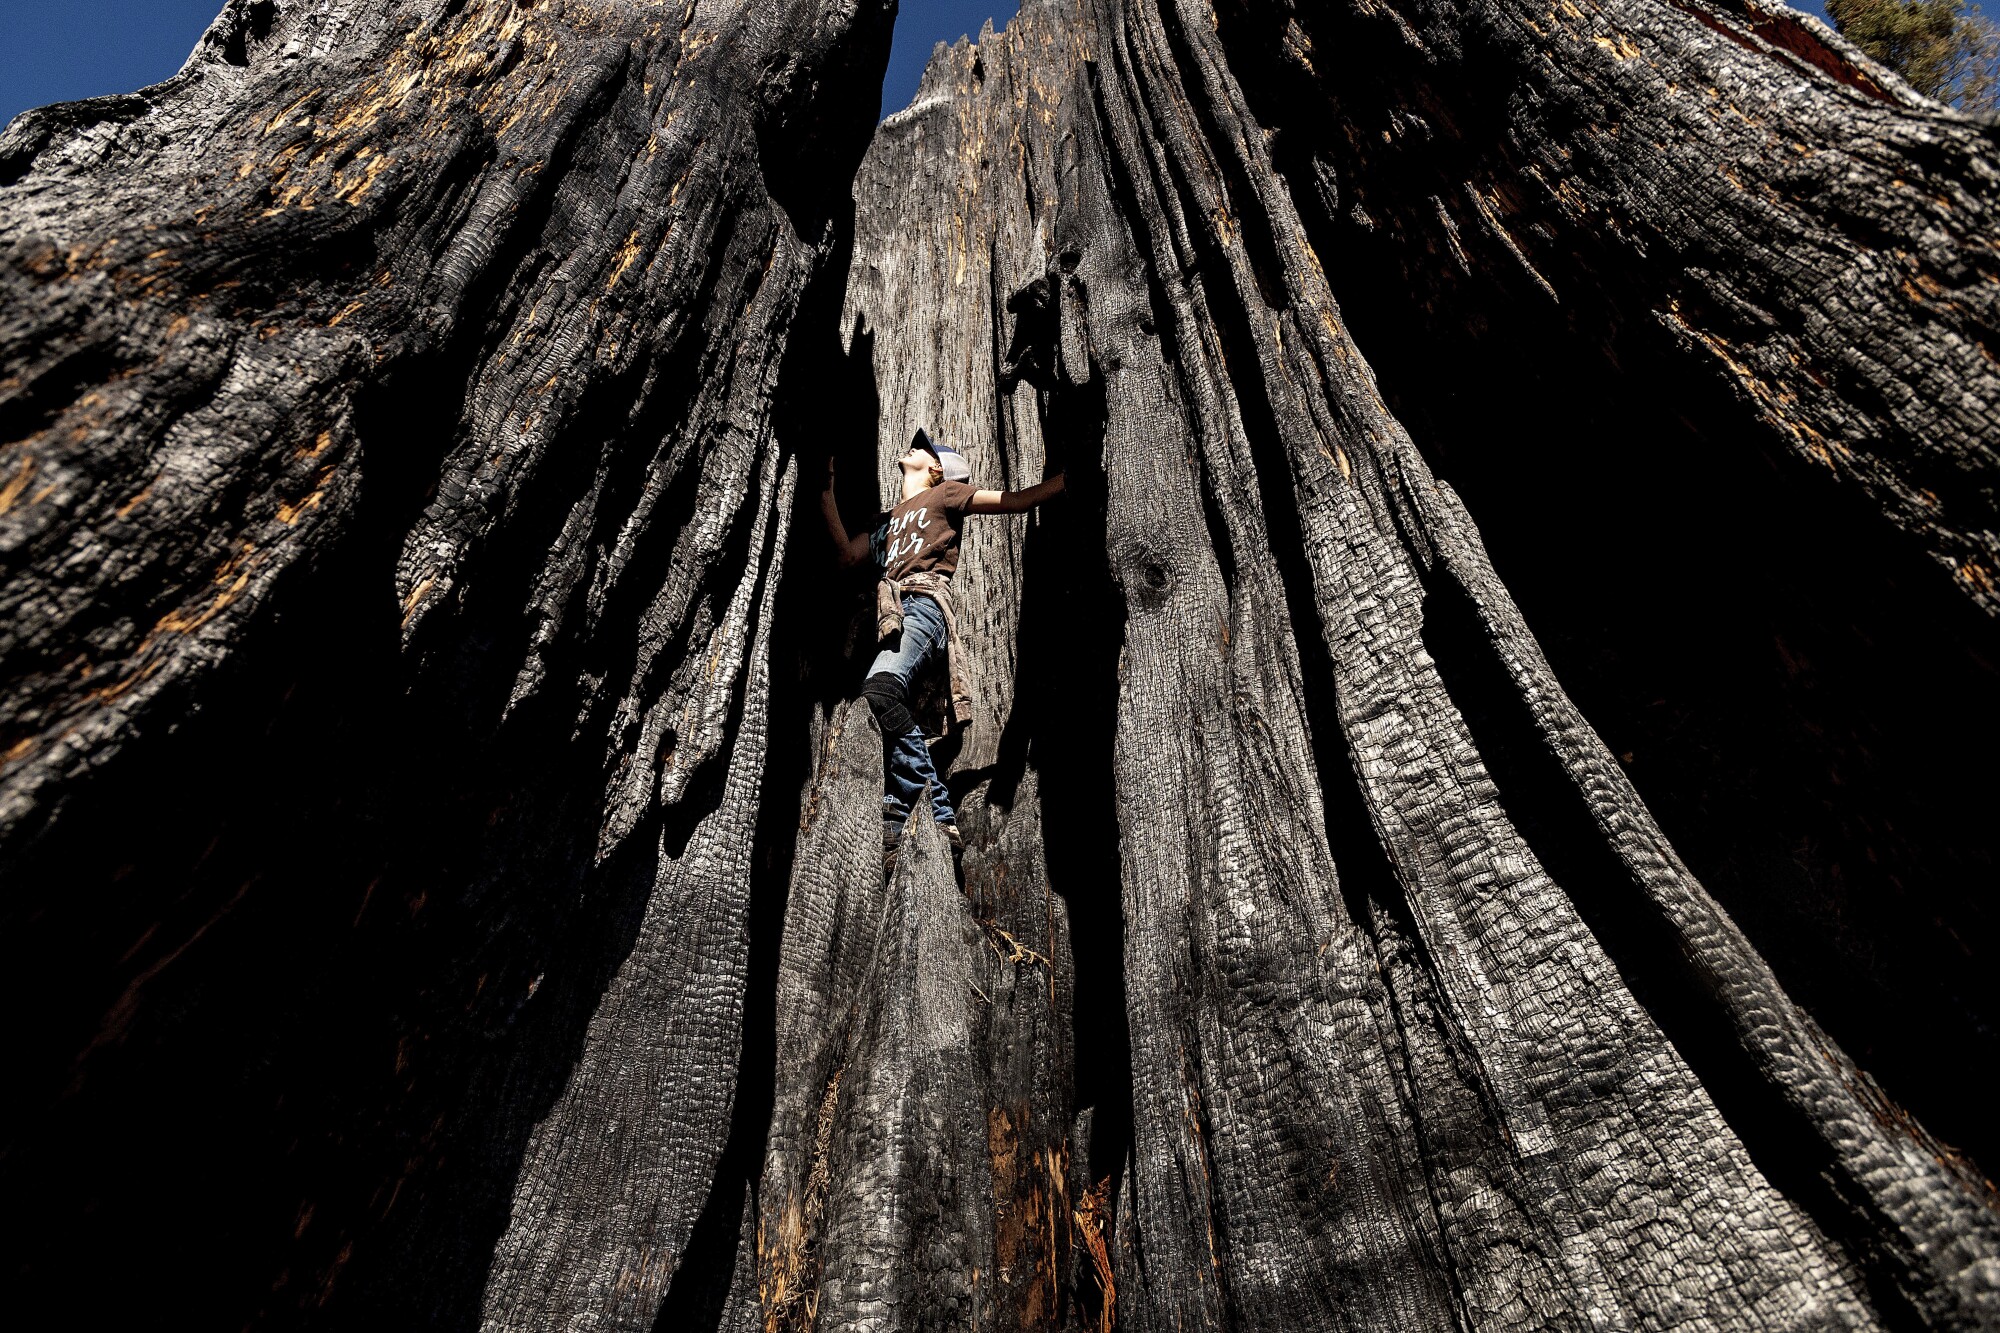 A girl climbs a scorched sequoia tree 